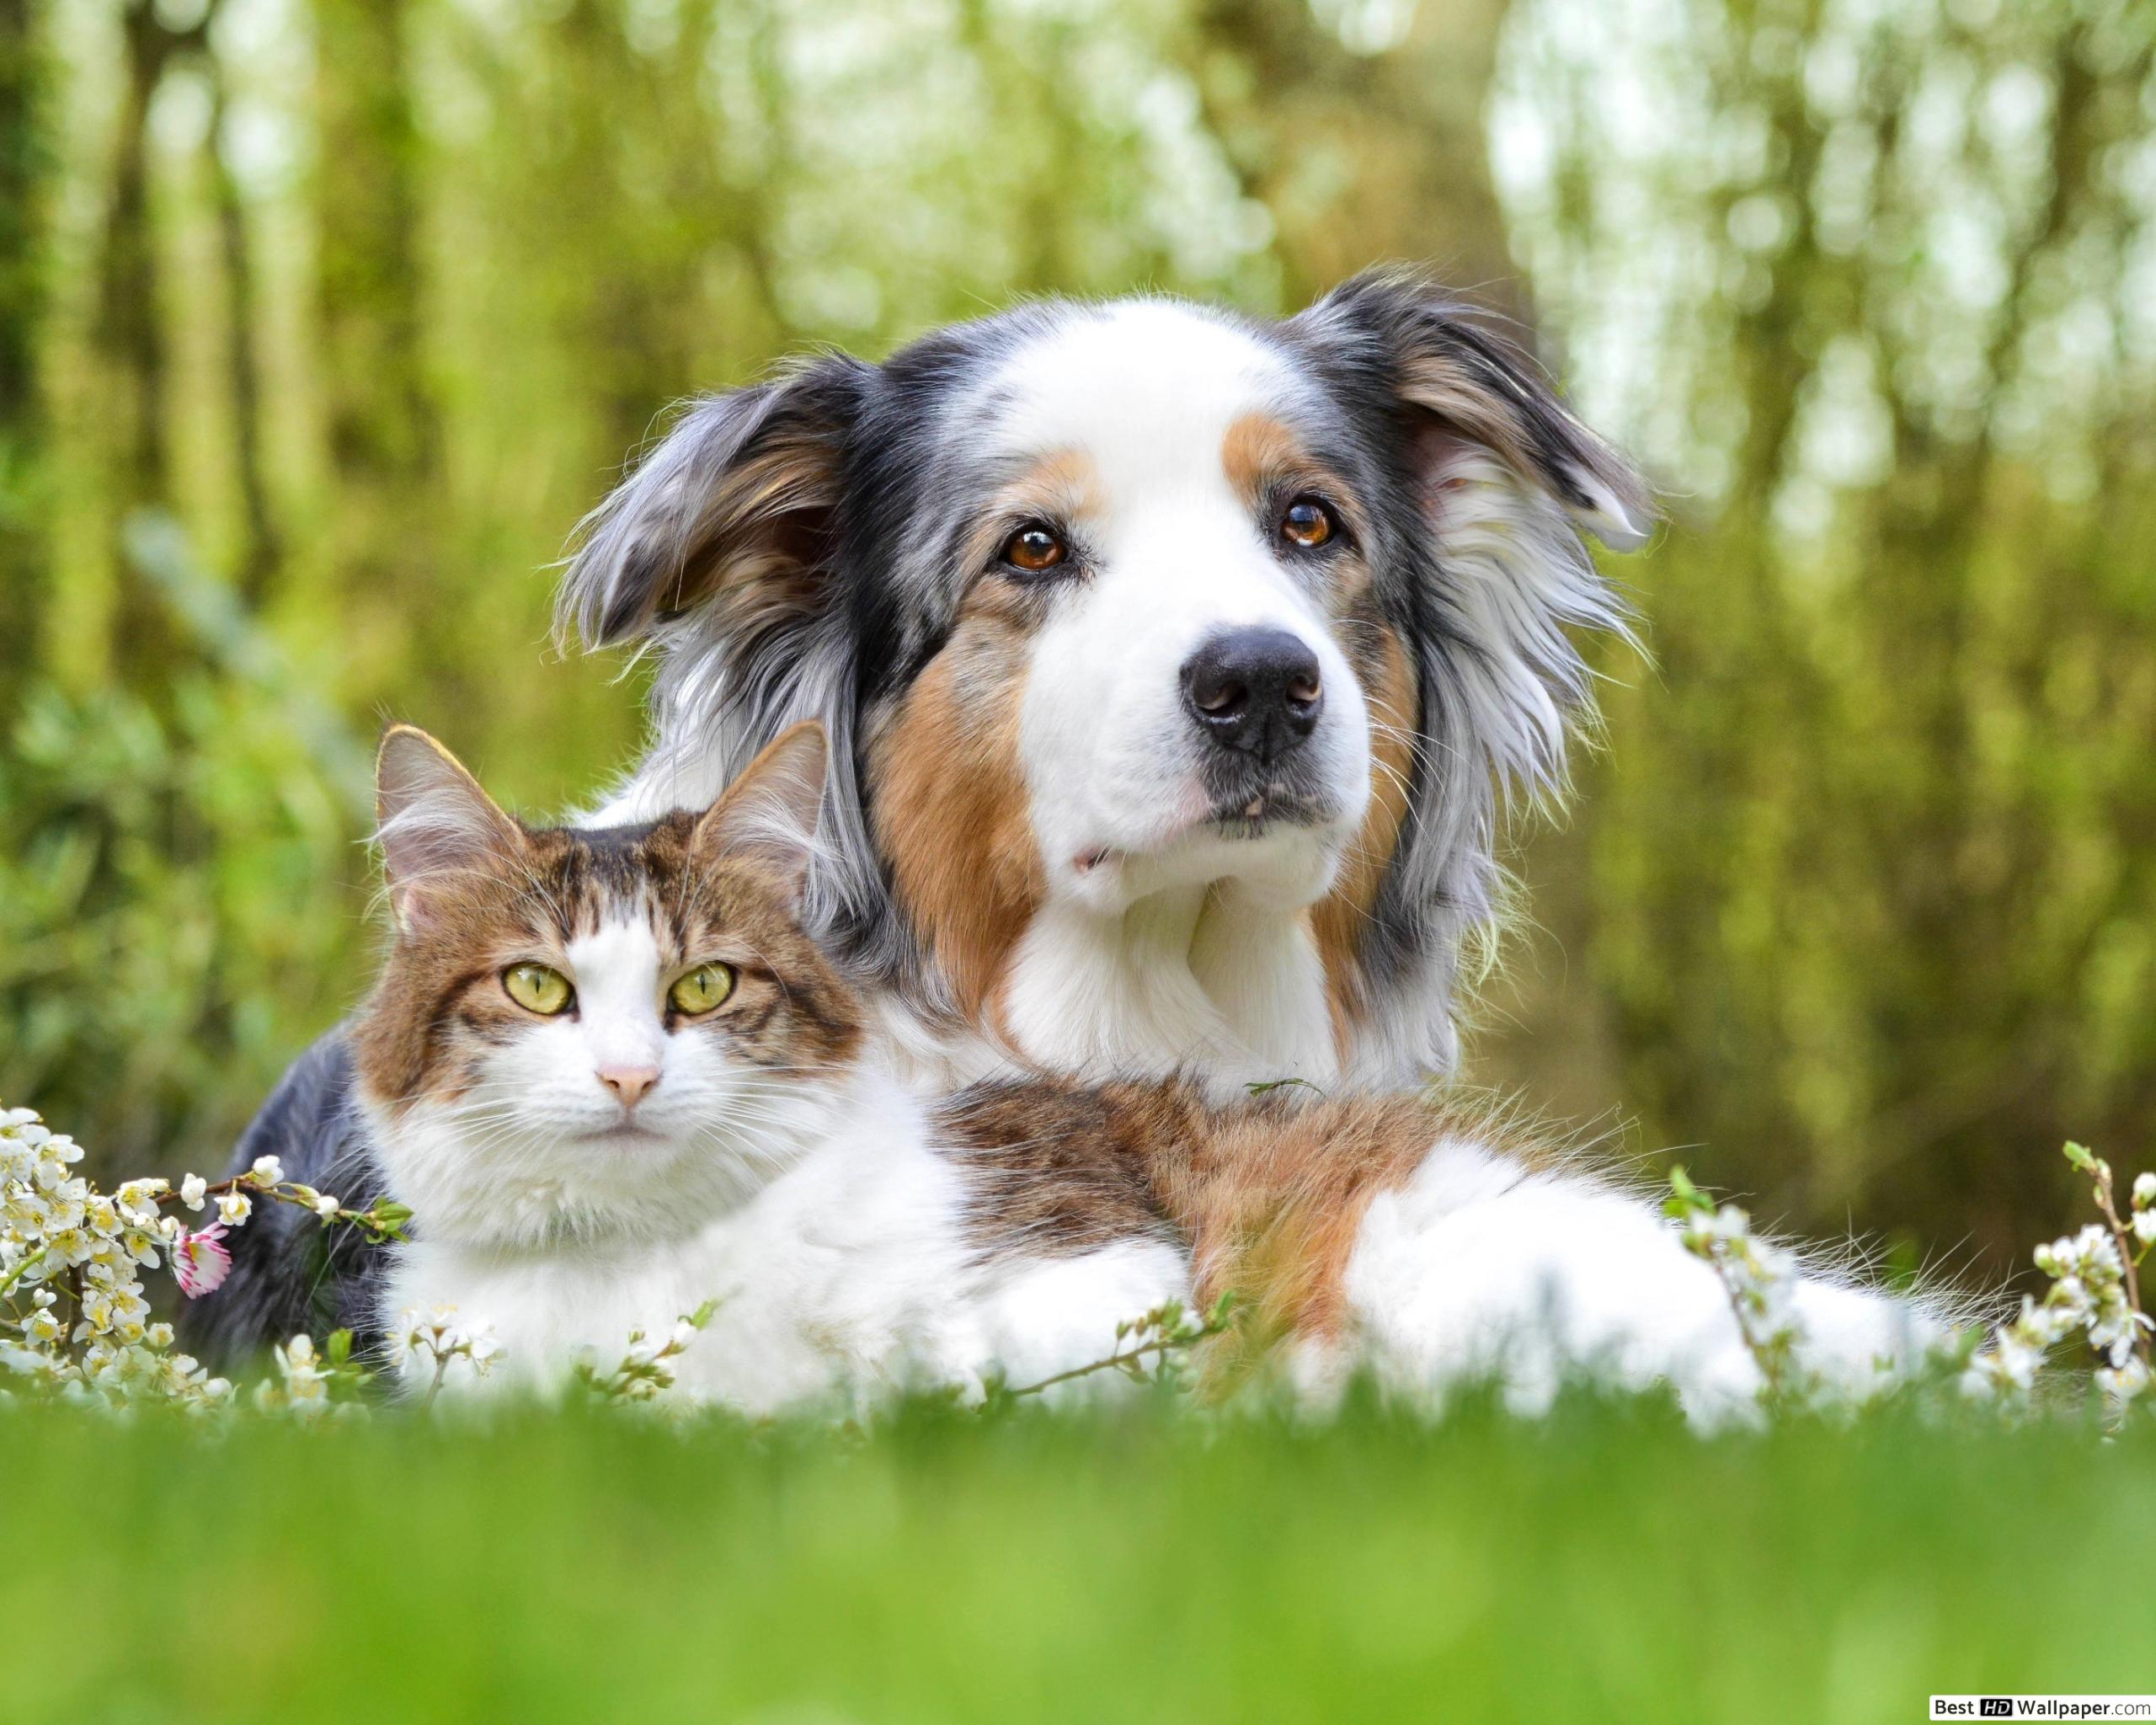 Dog and Cat HD wallpaper download